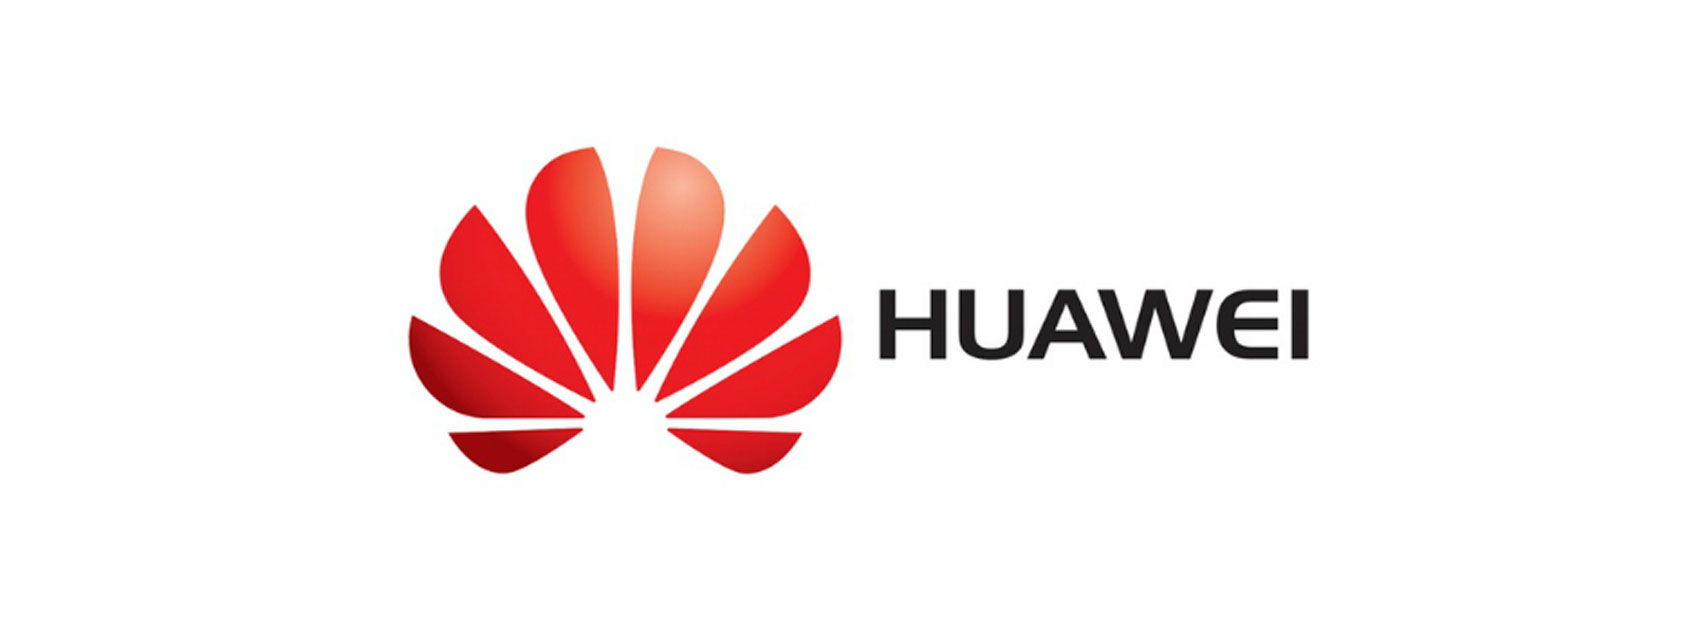 Huawei Amazing Facts, Huawei Facts, Huawei Facts 2019, Huawei History and Facts, Huawei Lesser Known Facts, Huawei Success Story, Huawei Unknown Facts, Inspiring Facts about Huawei, Interesting Facts 2019, Most Interesting Facts, startup stories, Surprising Facts About Huawei